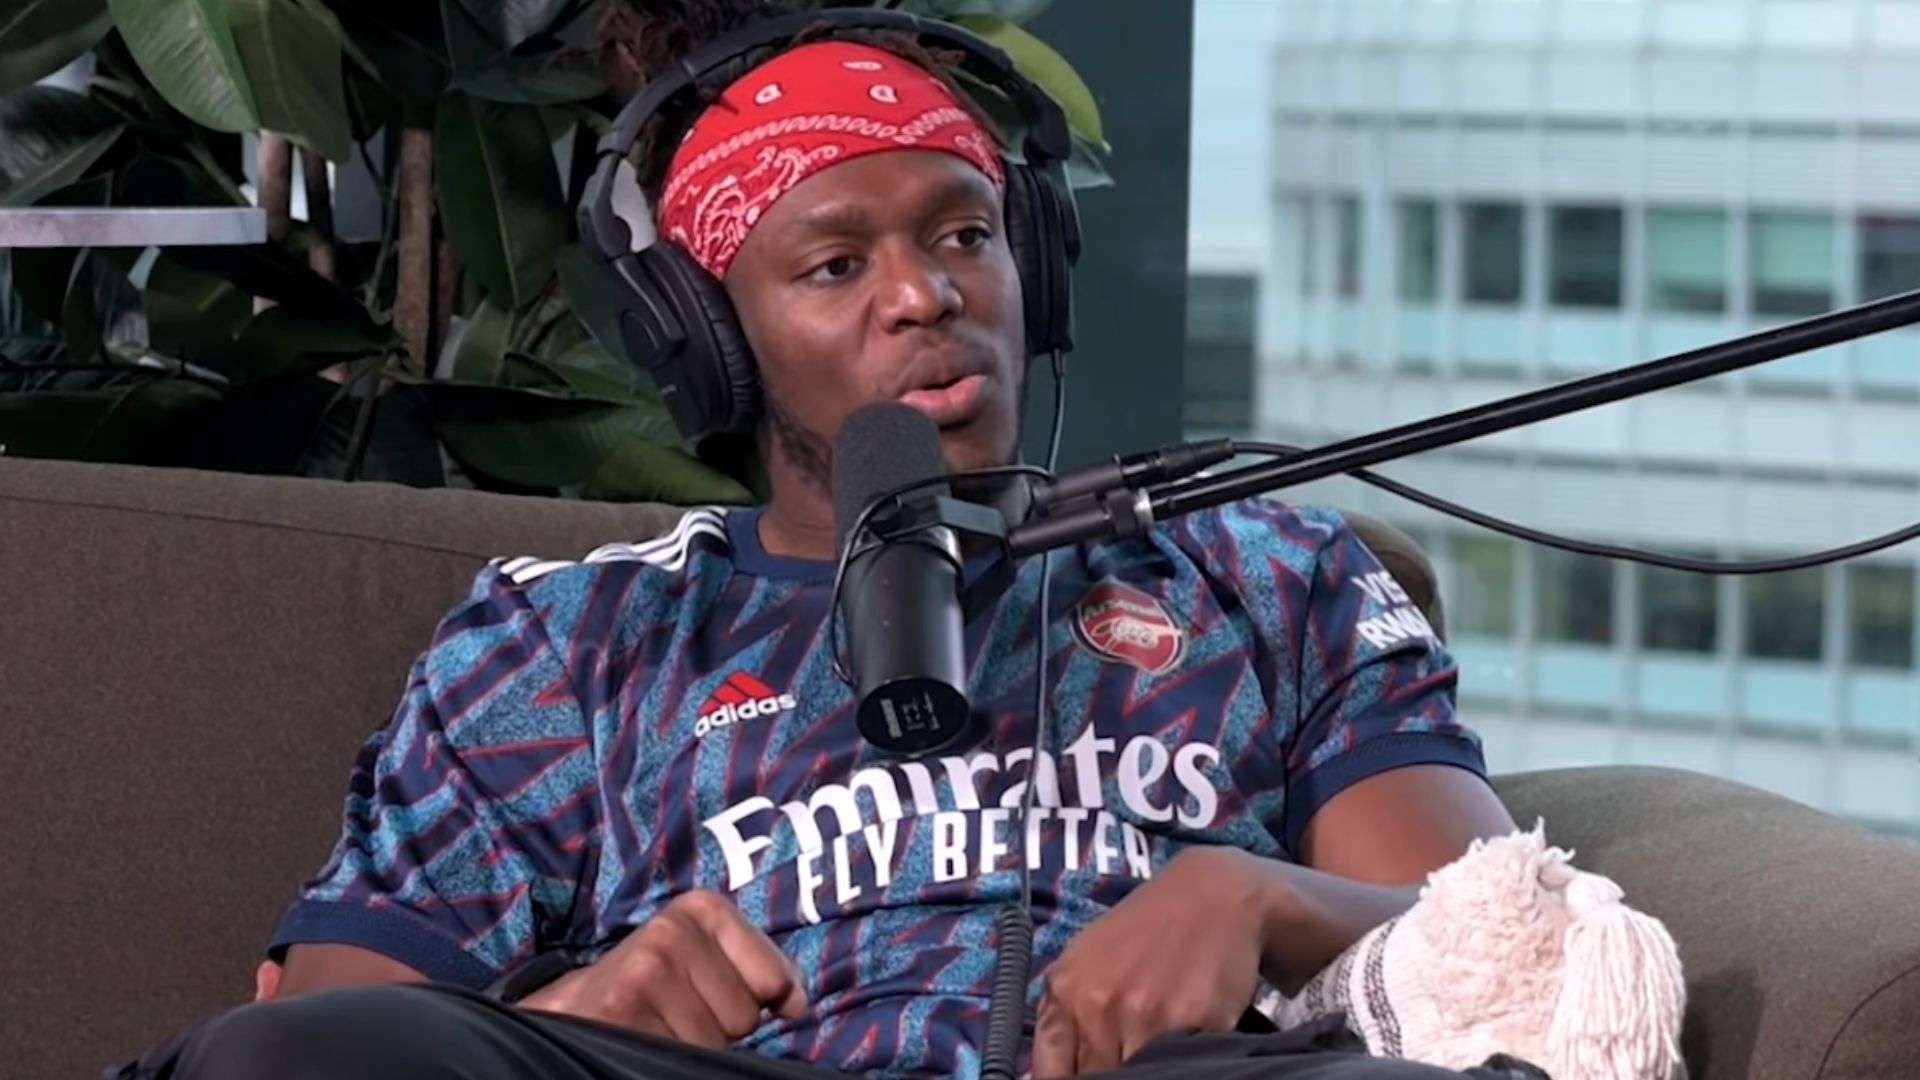 KSI in red bandana and purple arsenal shirt talking into microphone